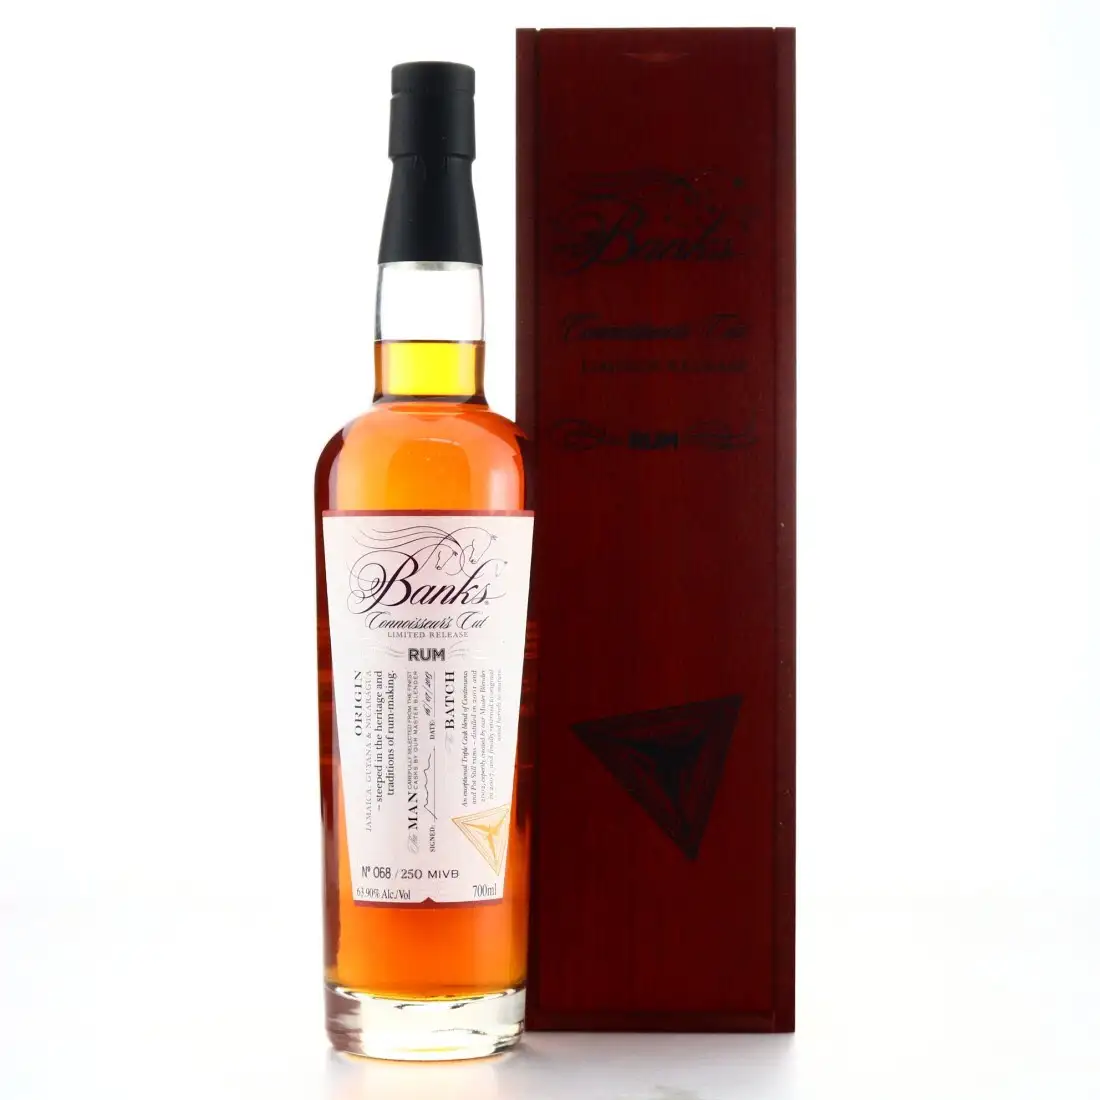 Image of the front of the bottle of the rum Connoisseur‘s Cut MIVB